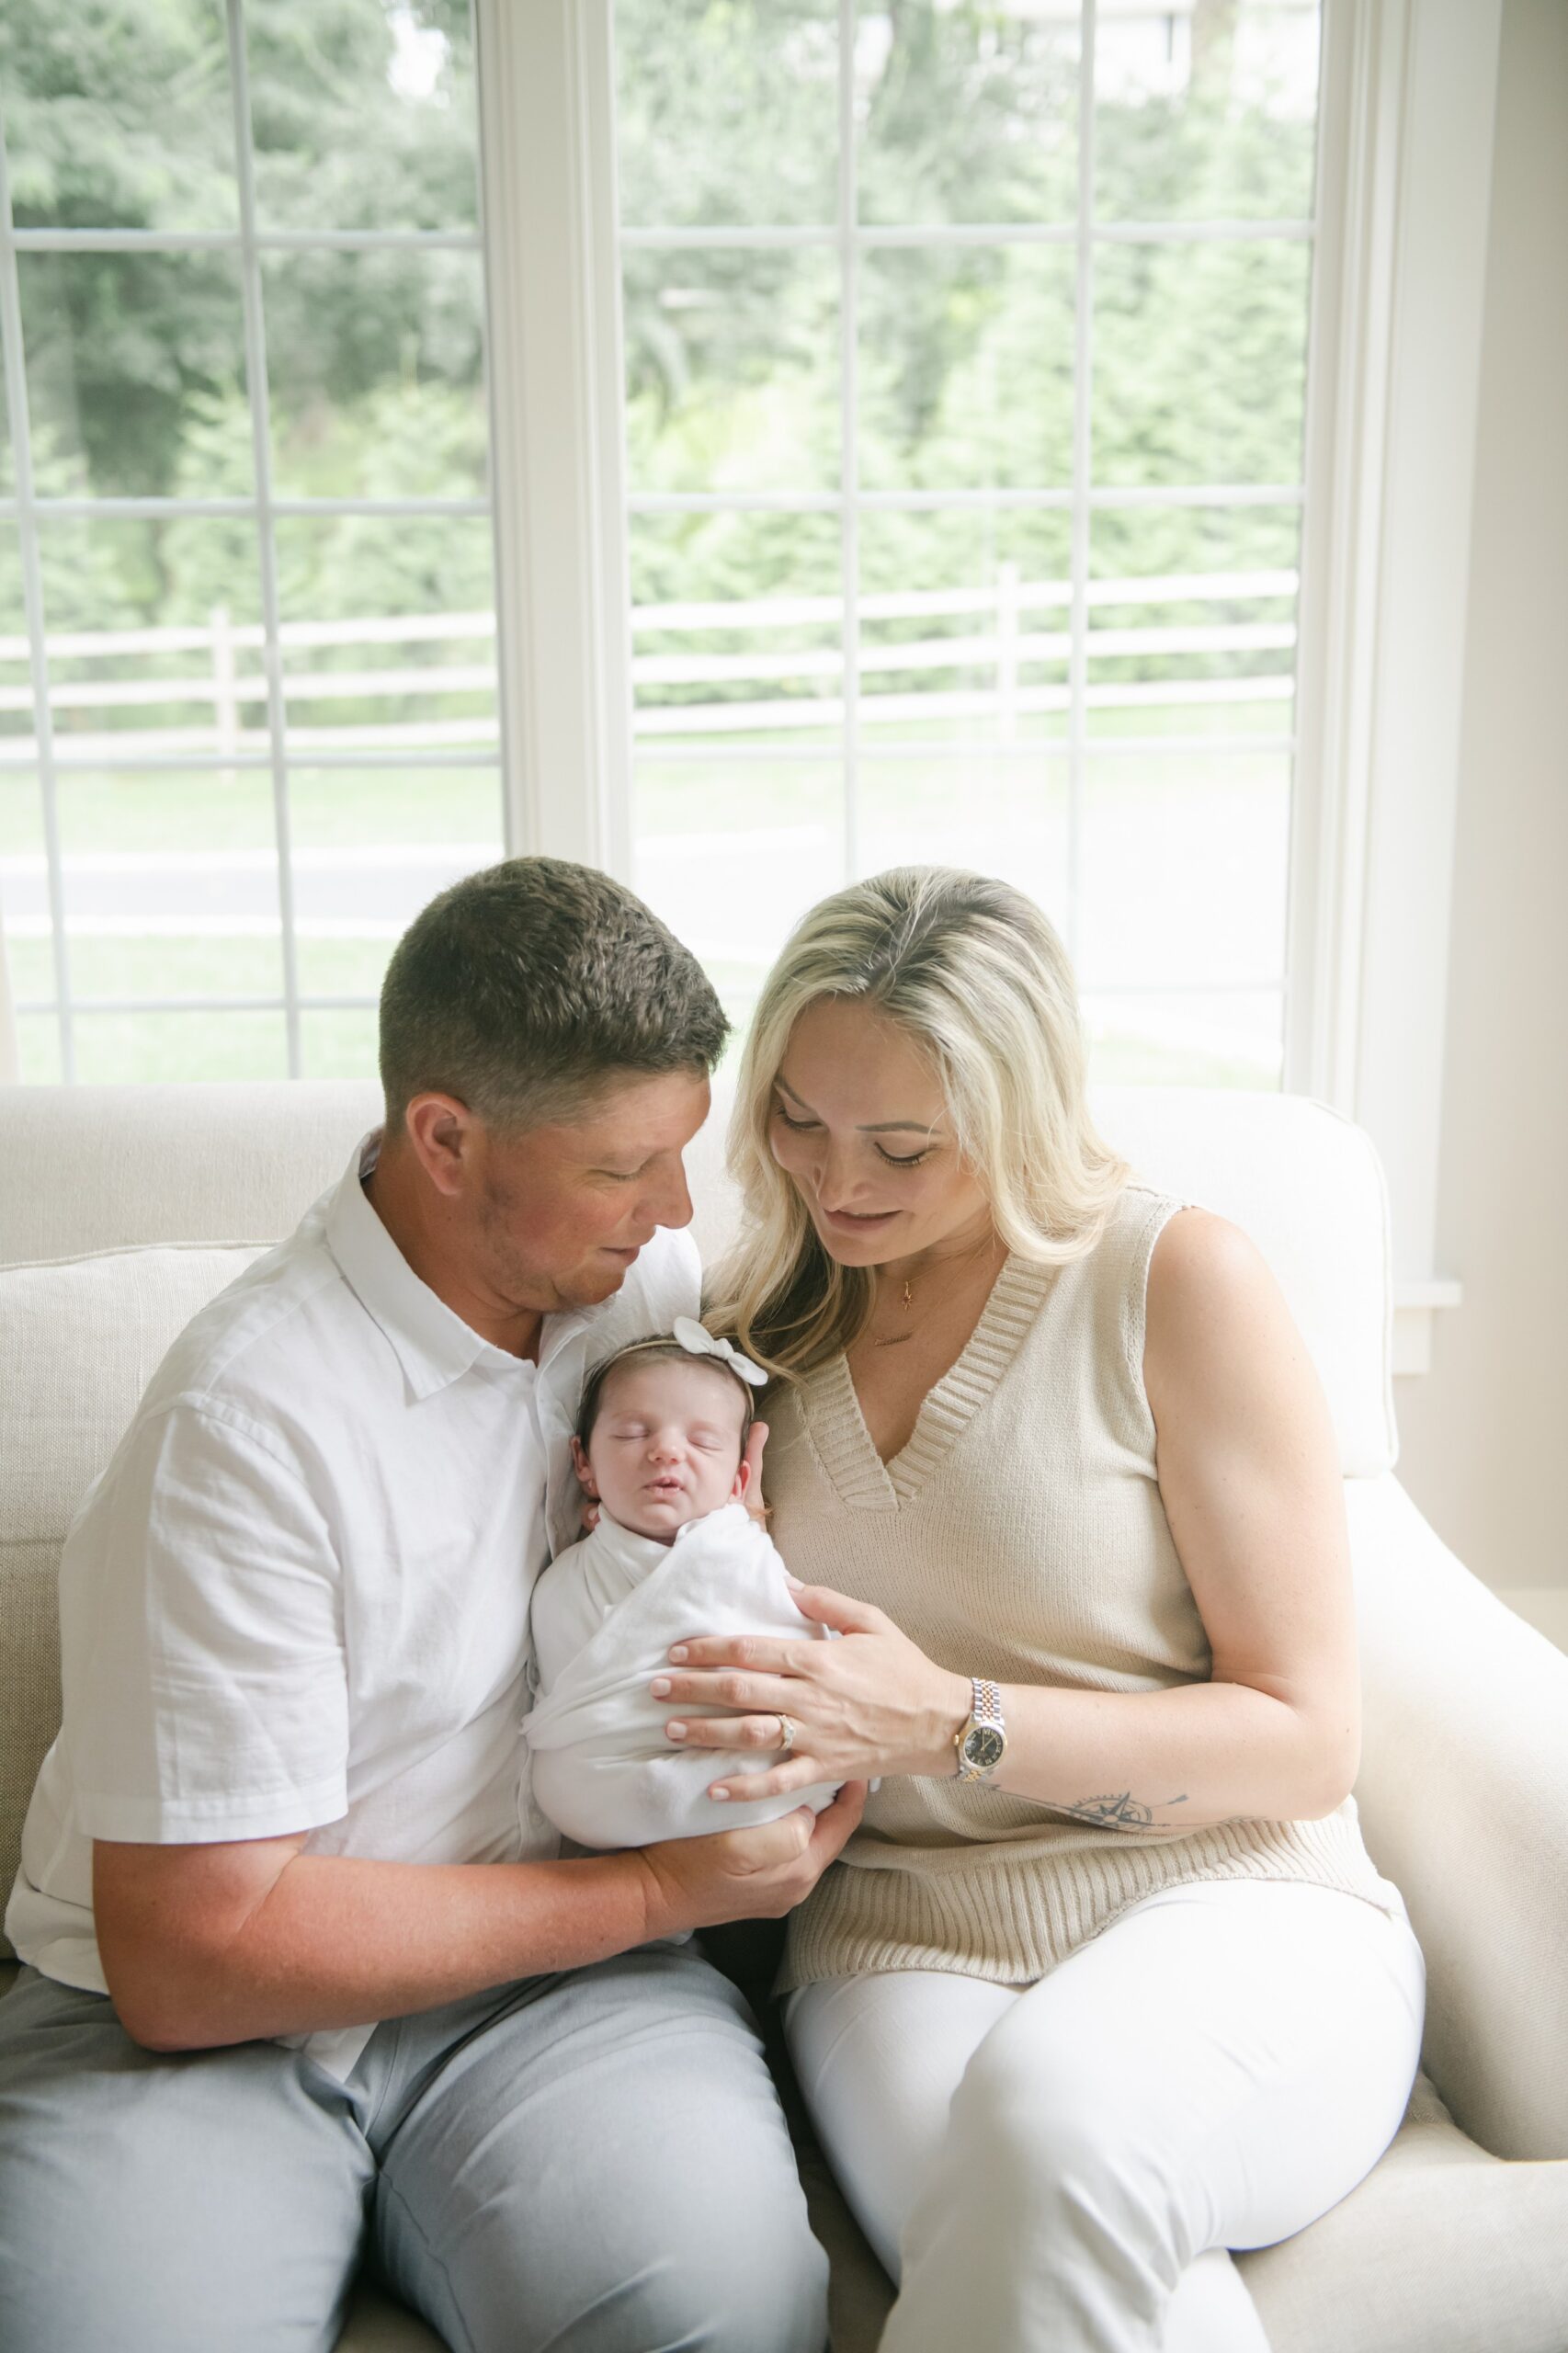 New parents sit on a couch by a window cradling their newborn daughter downington obgyn